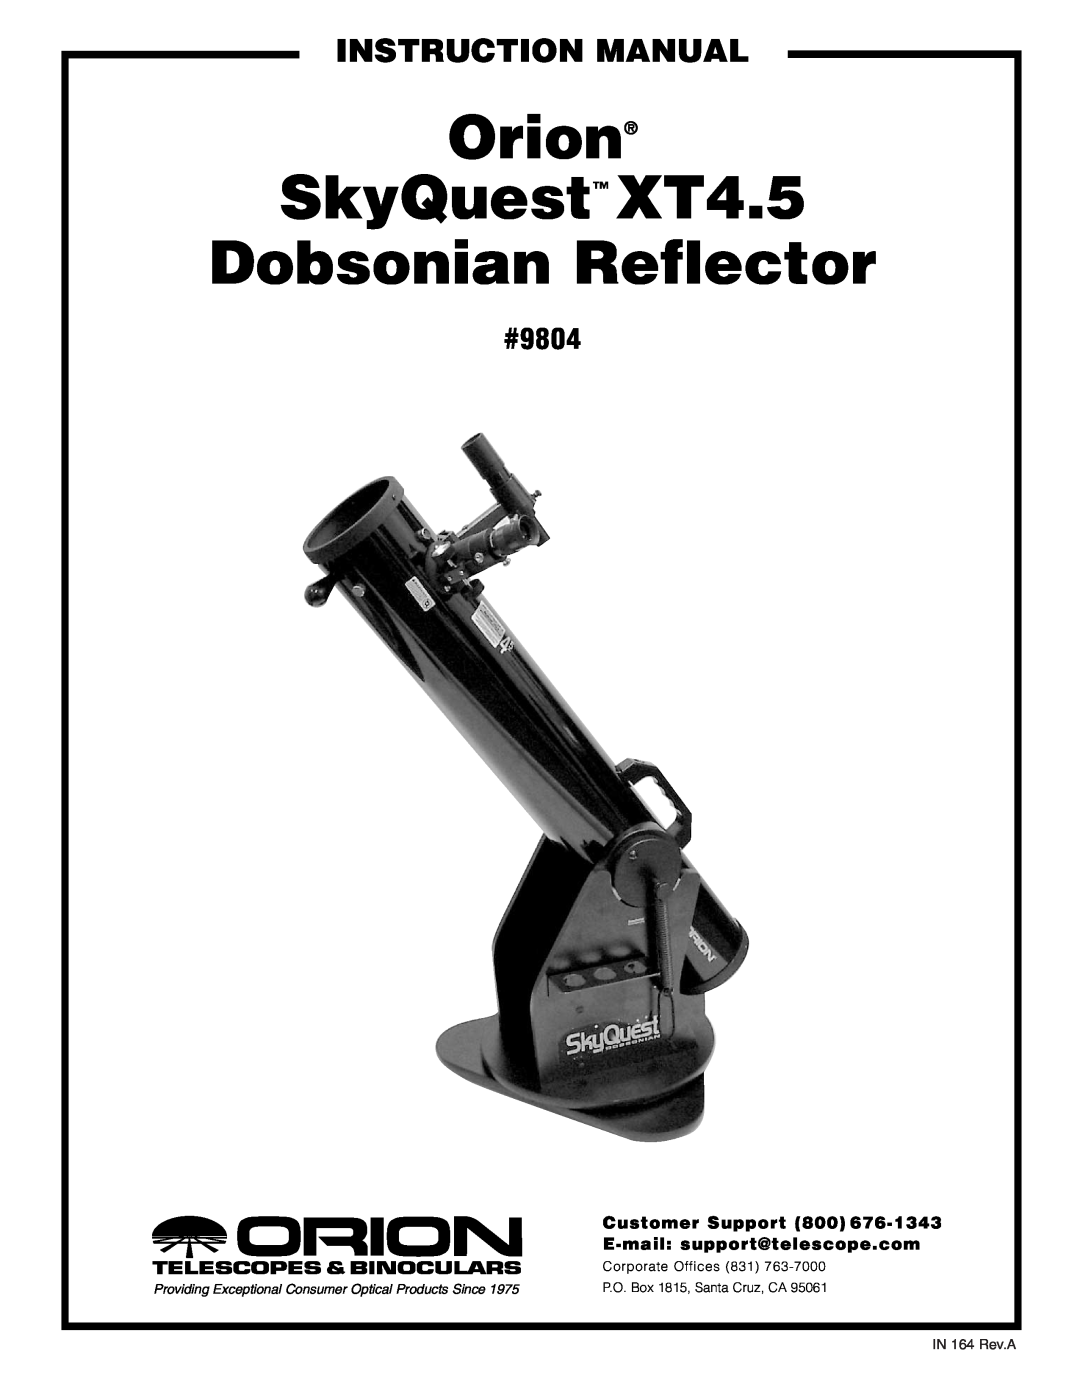 Orion instruction manual Orion, SkyQuest XT4.5, Dobsonian Reflector, #9804, Customer Support 